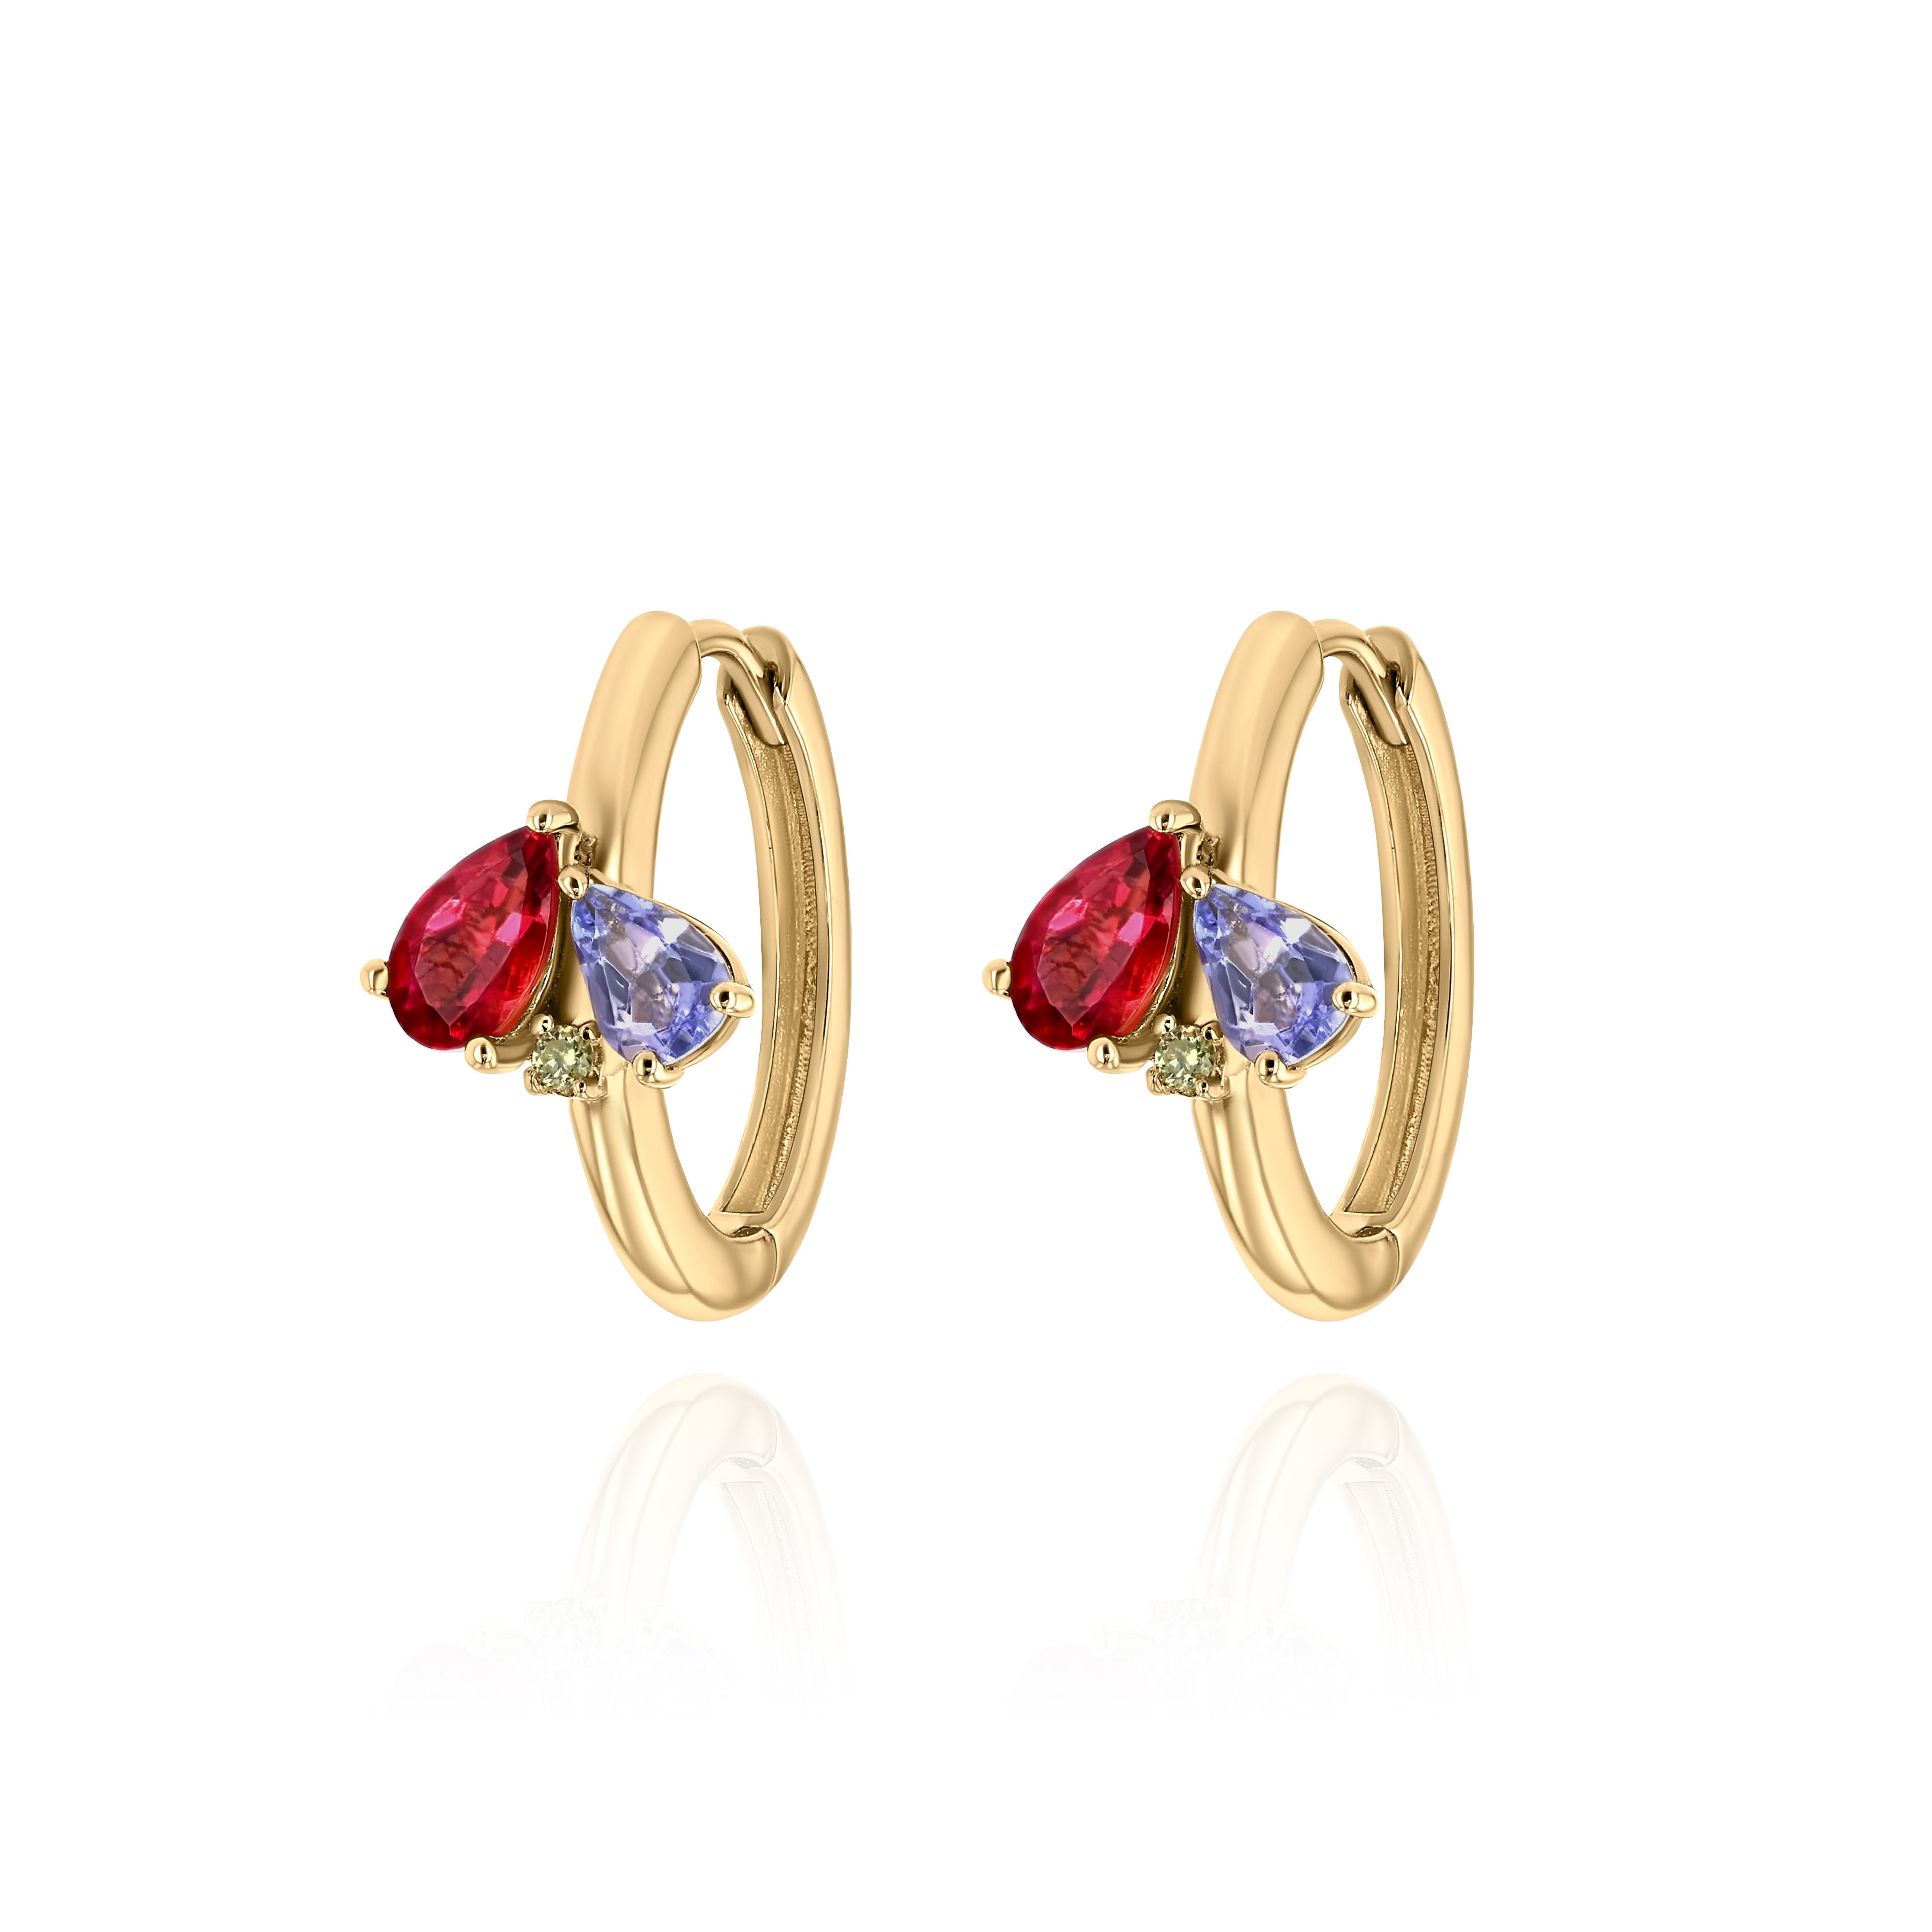 Yellow Gold hoop Earrings with Tanzanite and Pink Tourmaline, and a small round Diamond, Medium